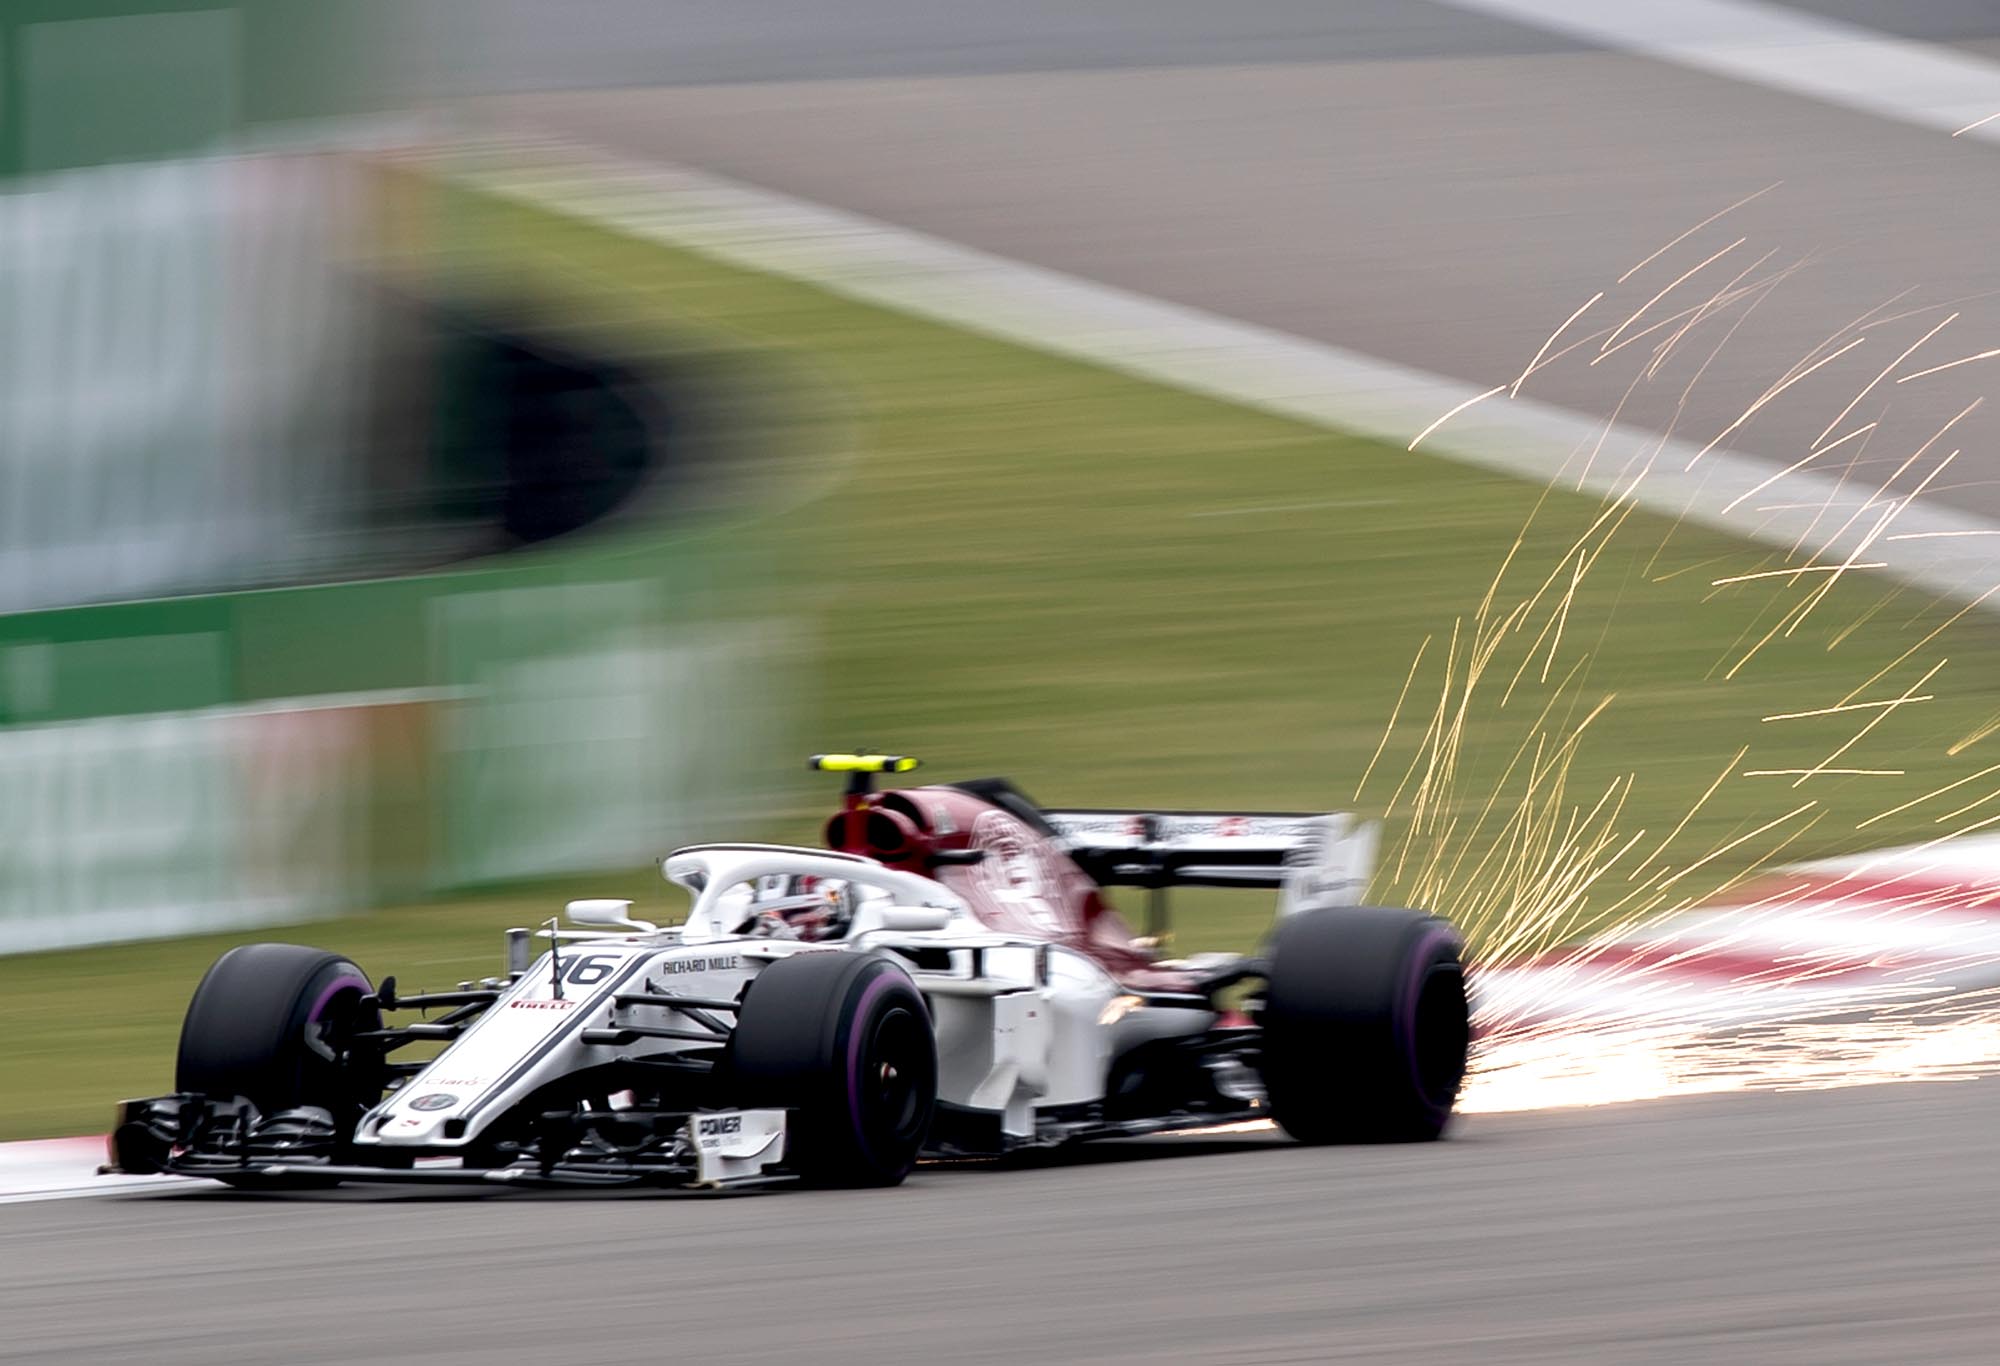 Charles Leclerc on track at the 2018 Chinese Grand Prix.